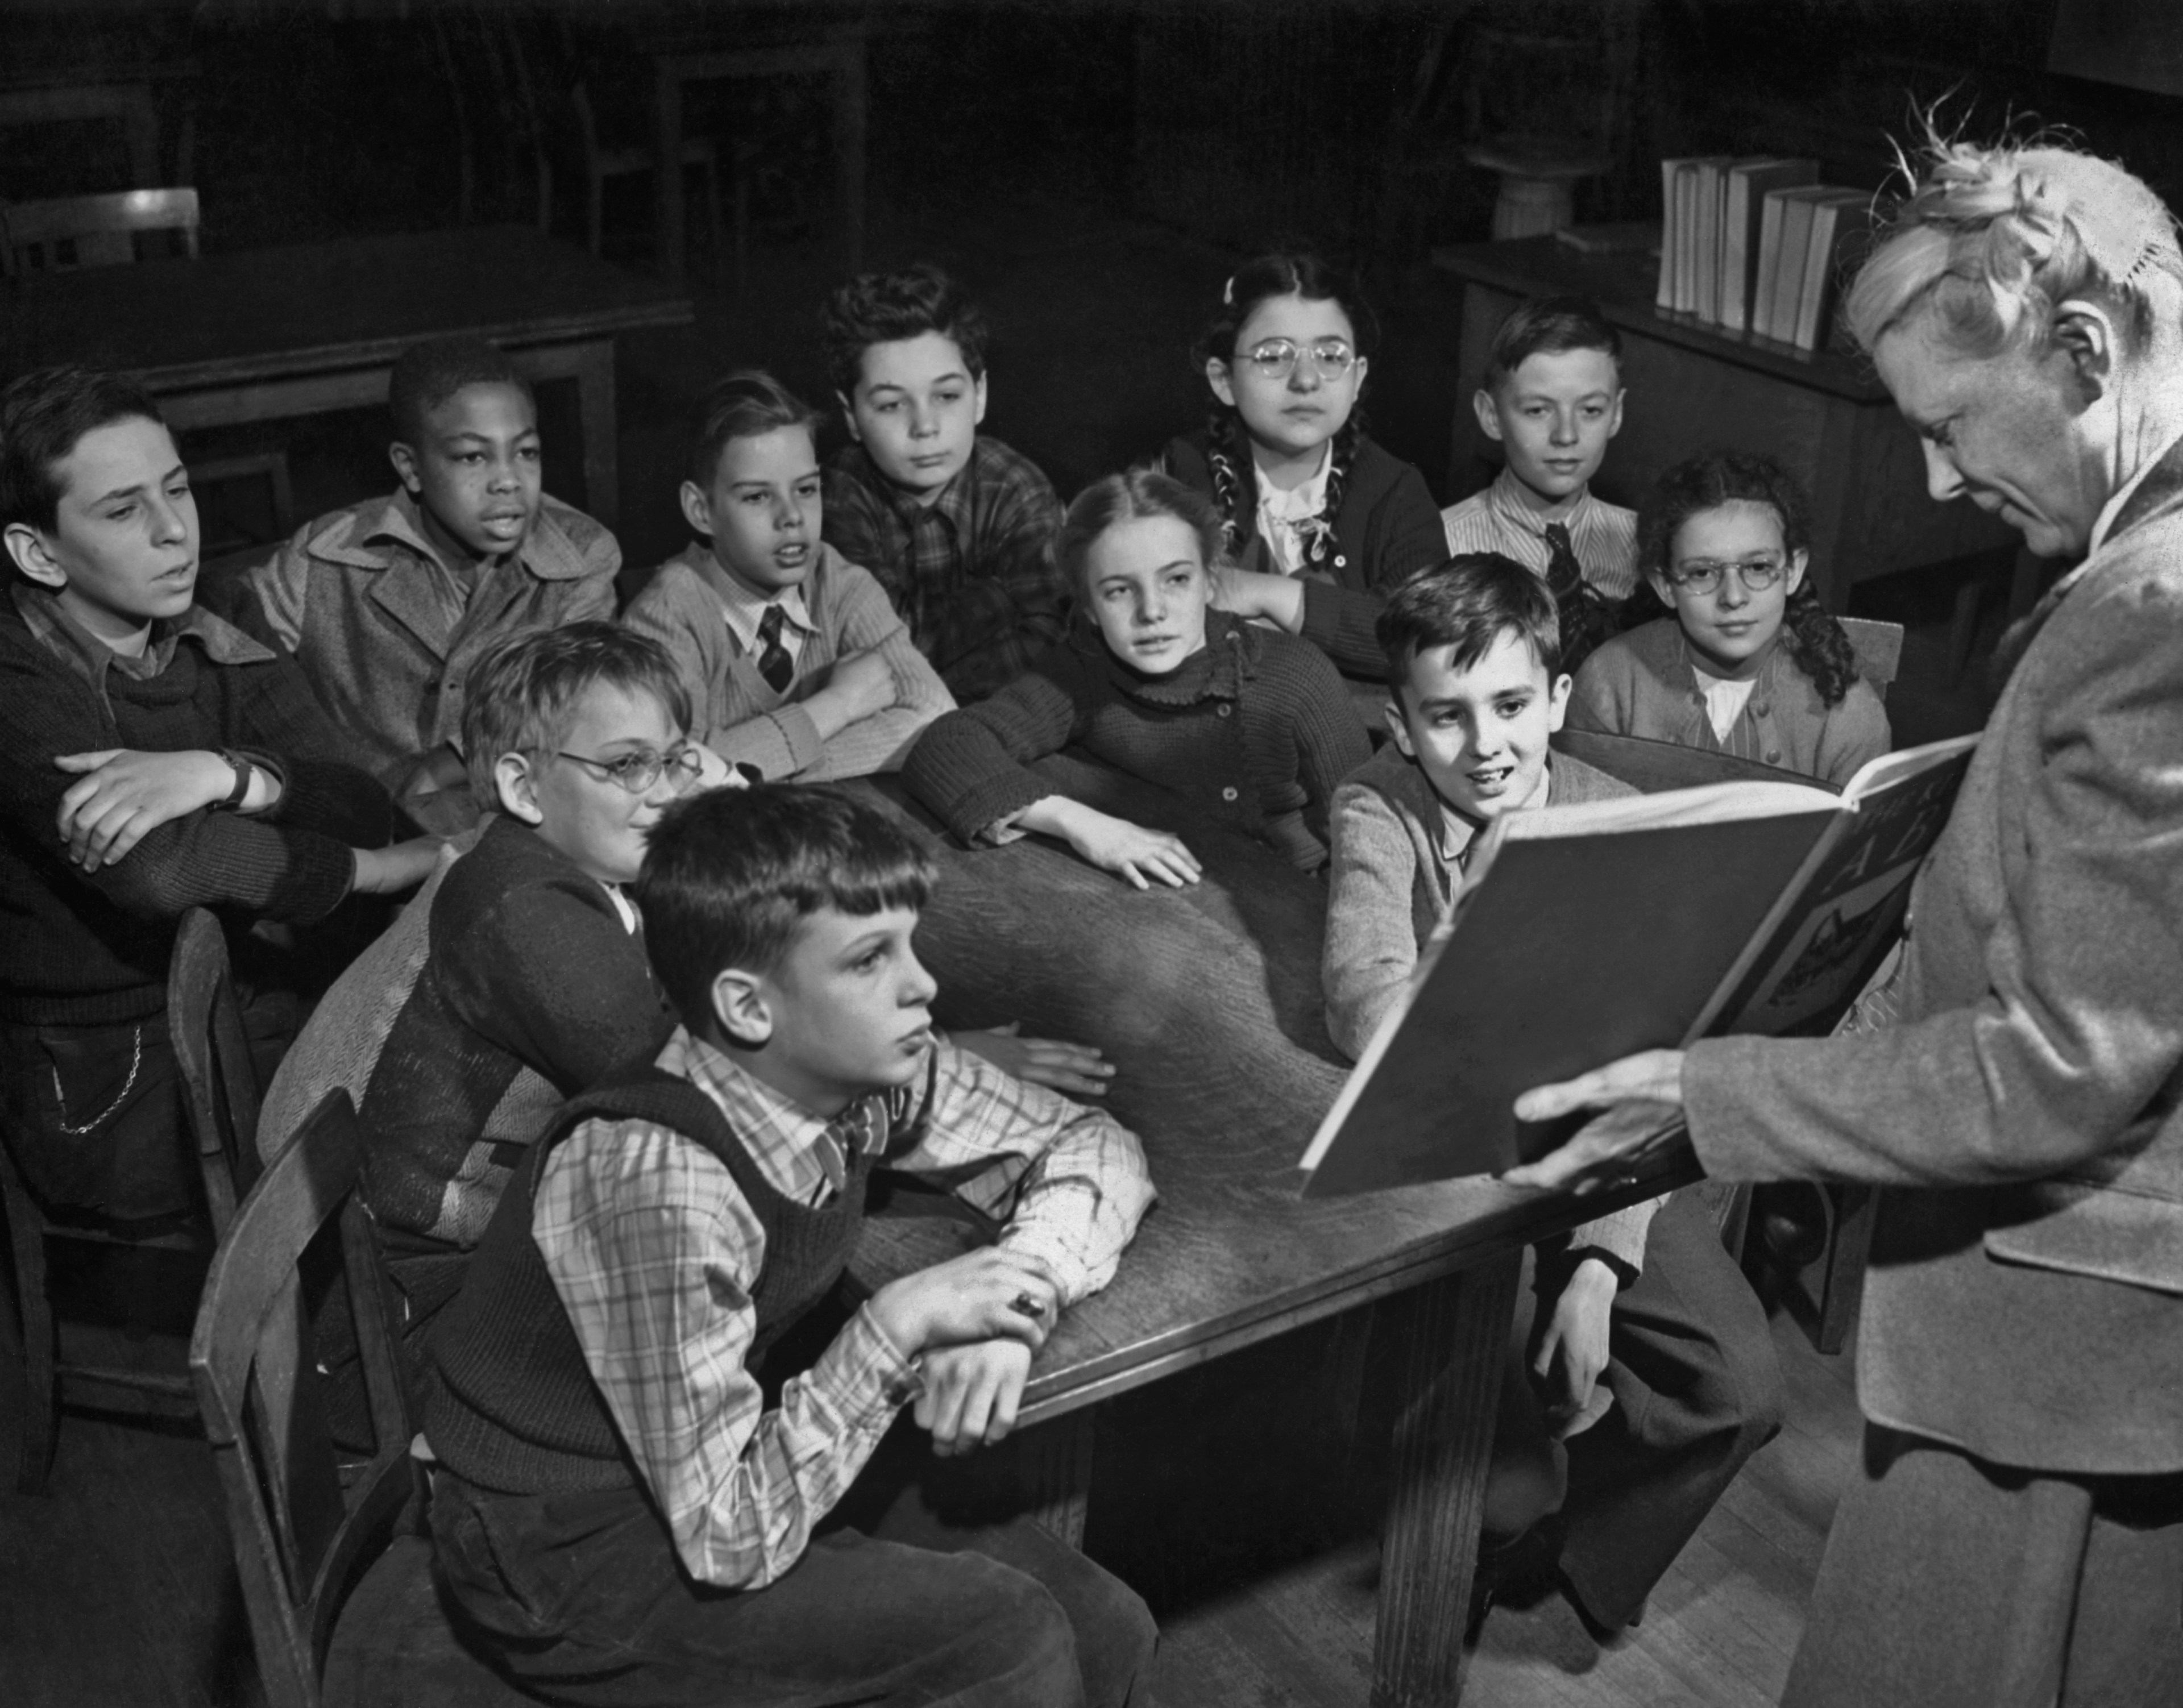 A library teacher giving a class to a group of boys and girls at a New York City public school, circa 1950.